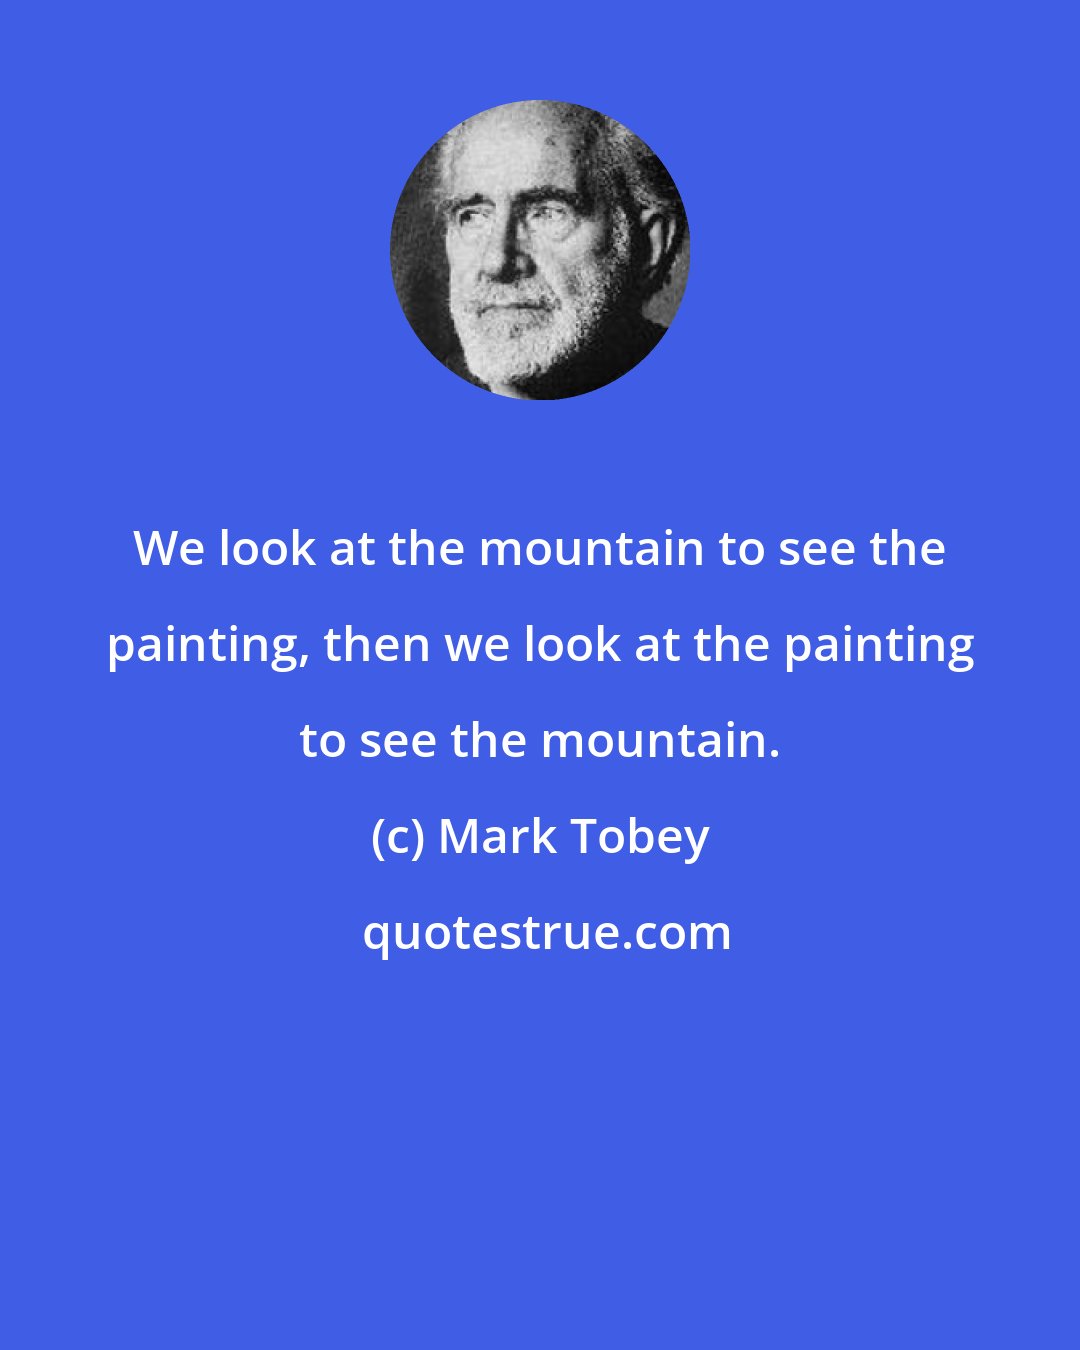 Mark Tobey: We look at the mountain to see the painting, then we look at the painting to see the mountain.